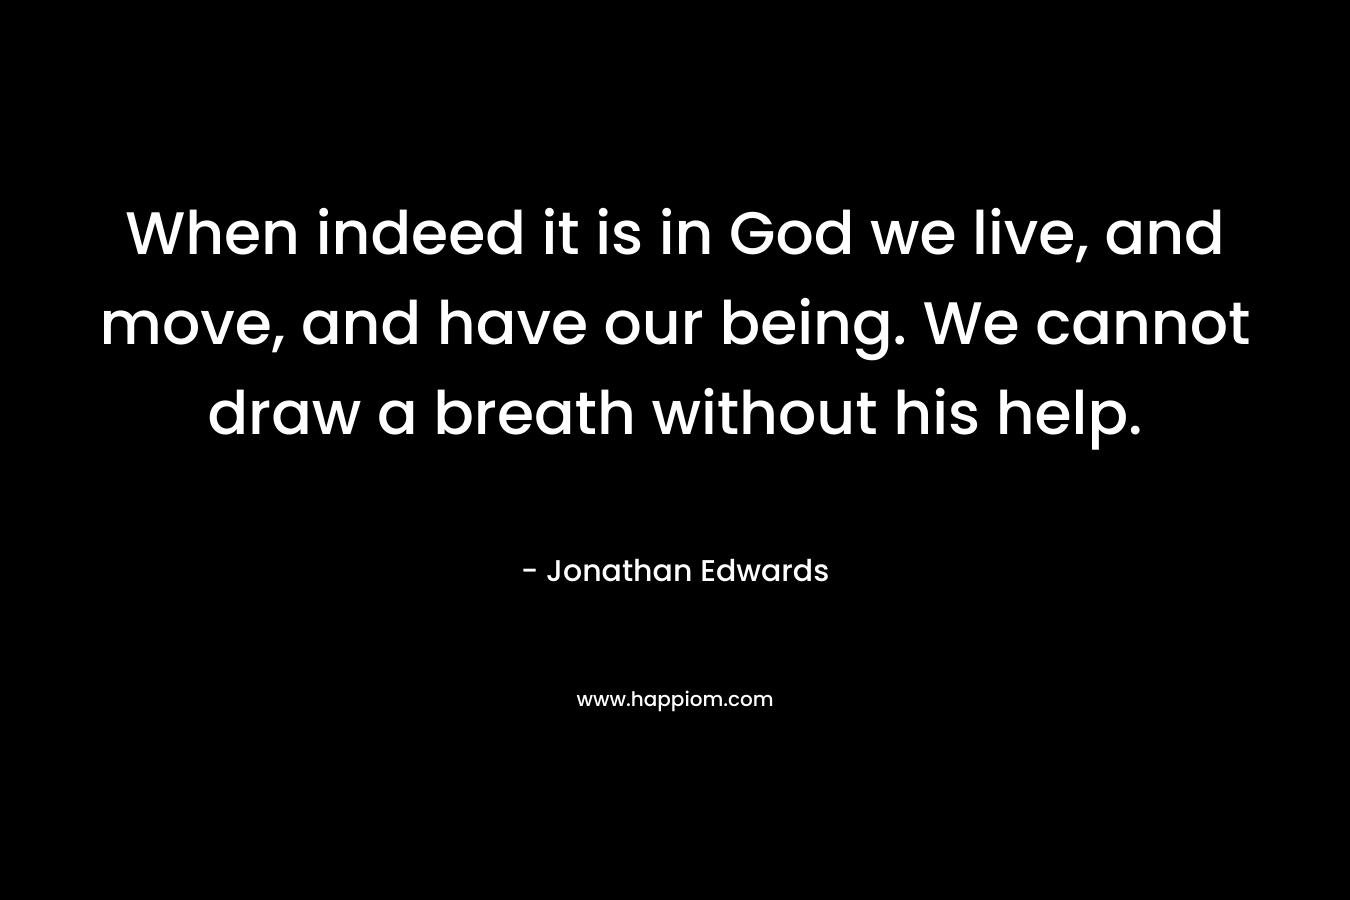 When indeed it is in God we live, and move, and have our being. We cannot draw a breath without his help. – Jonathan Edwards